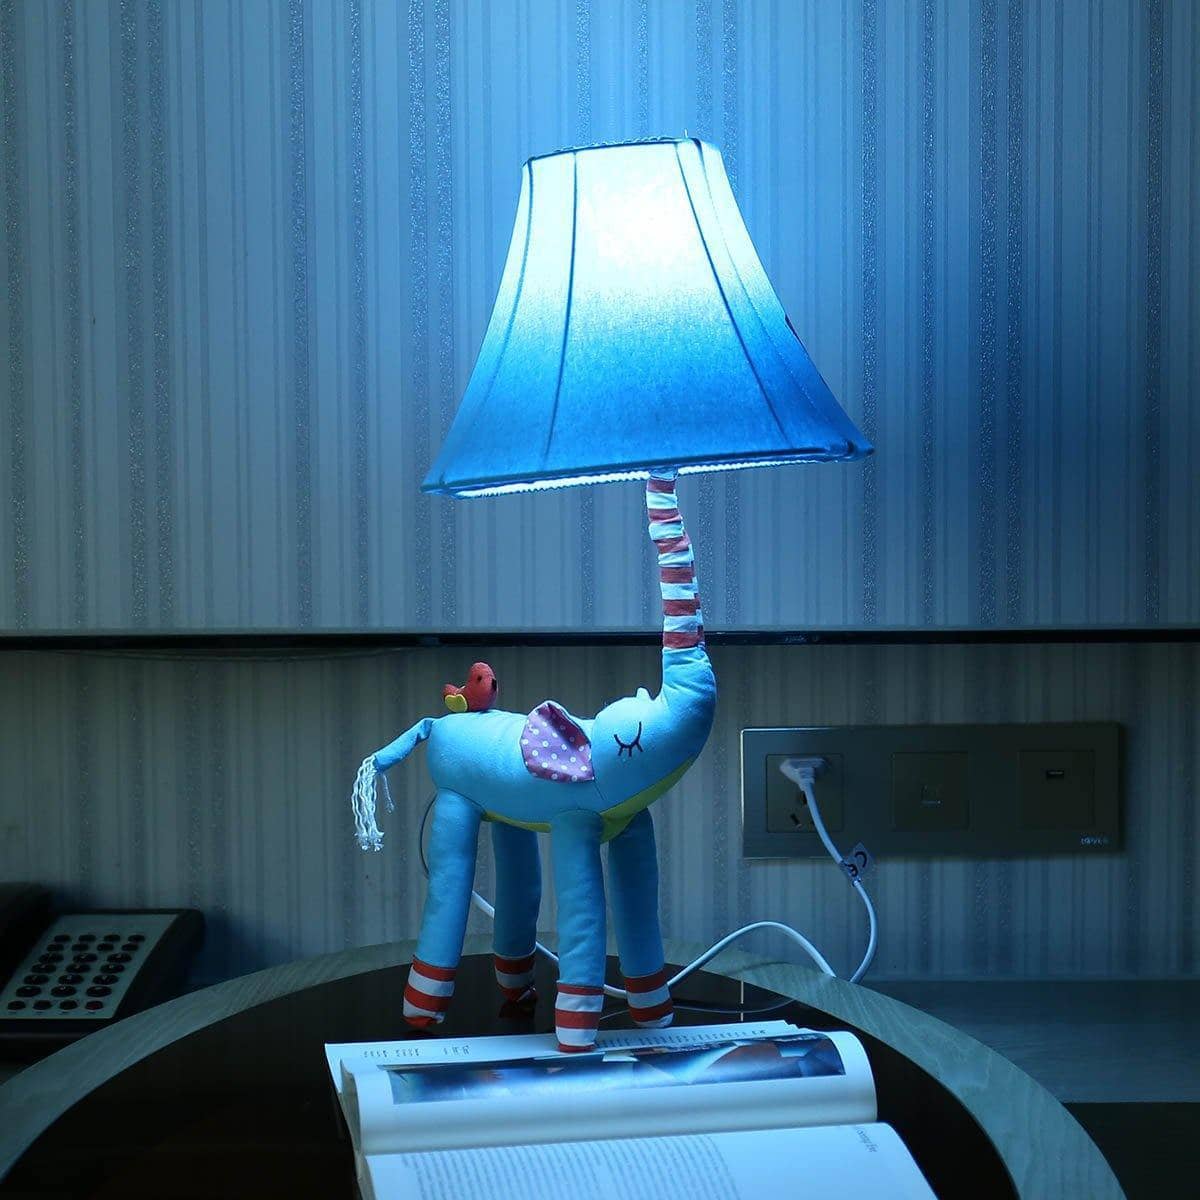 Blue Elephant Night Lamp - Fun Touch for Your Kid's Room Decor